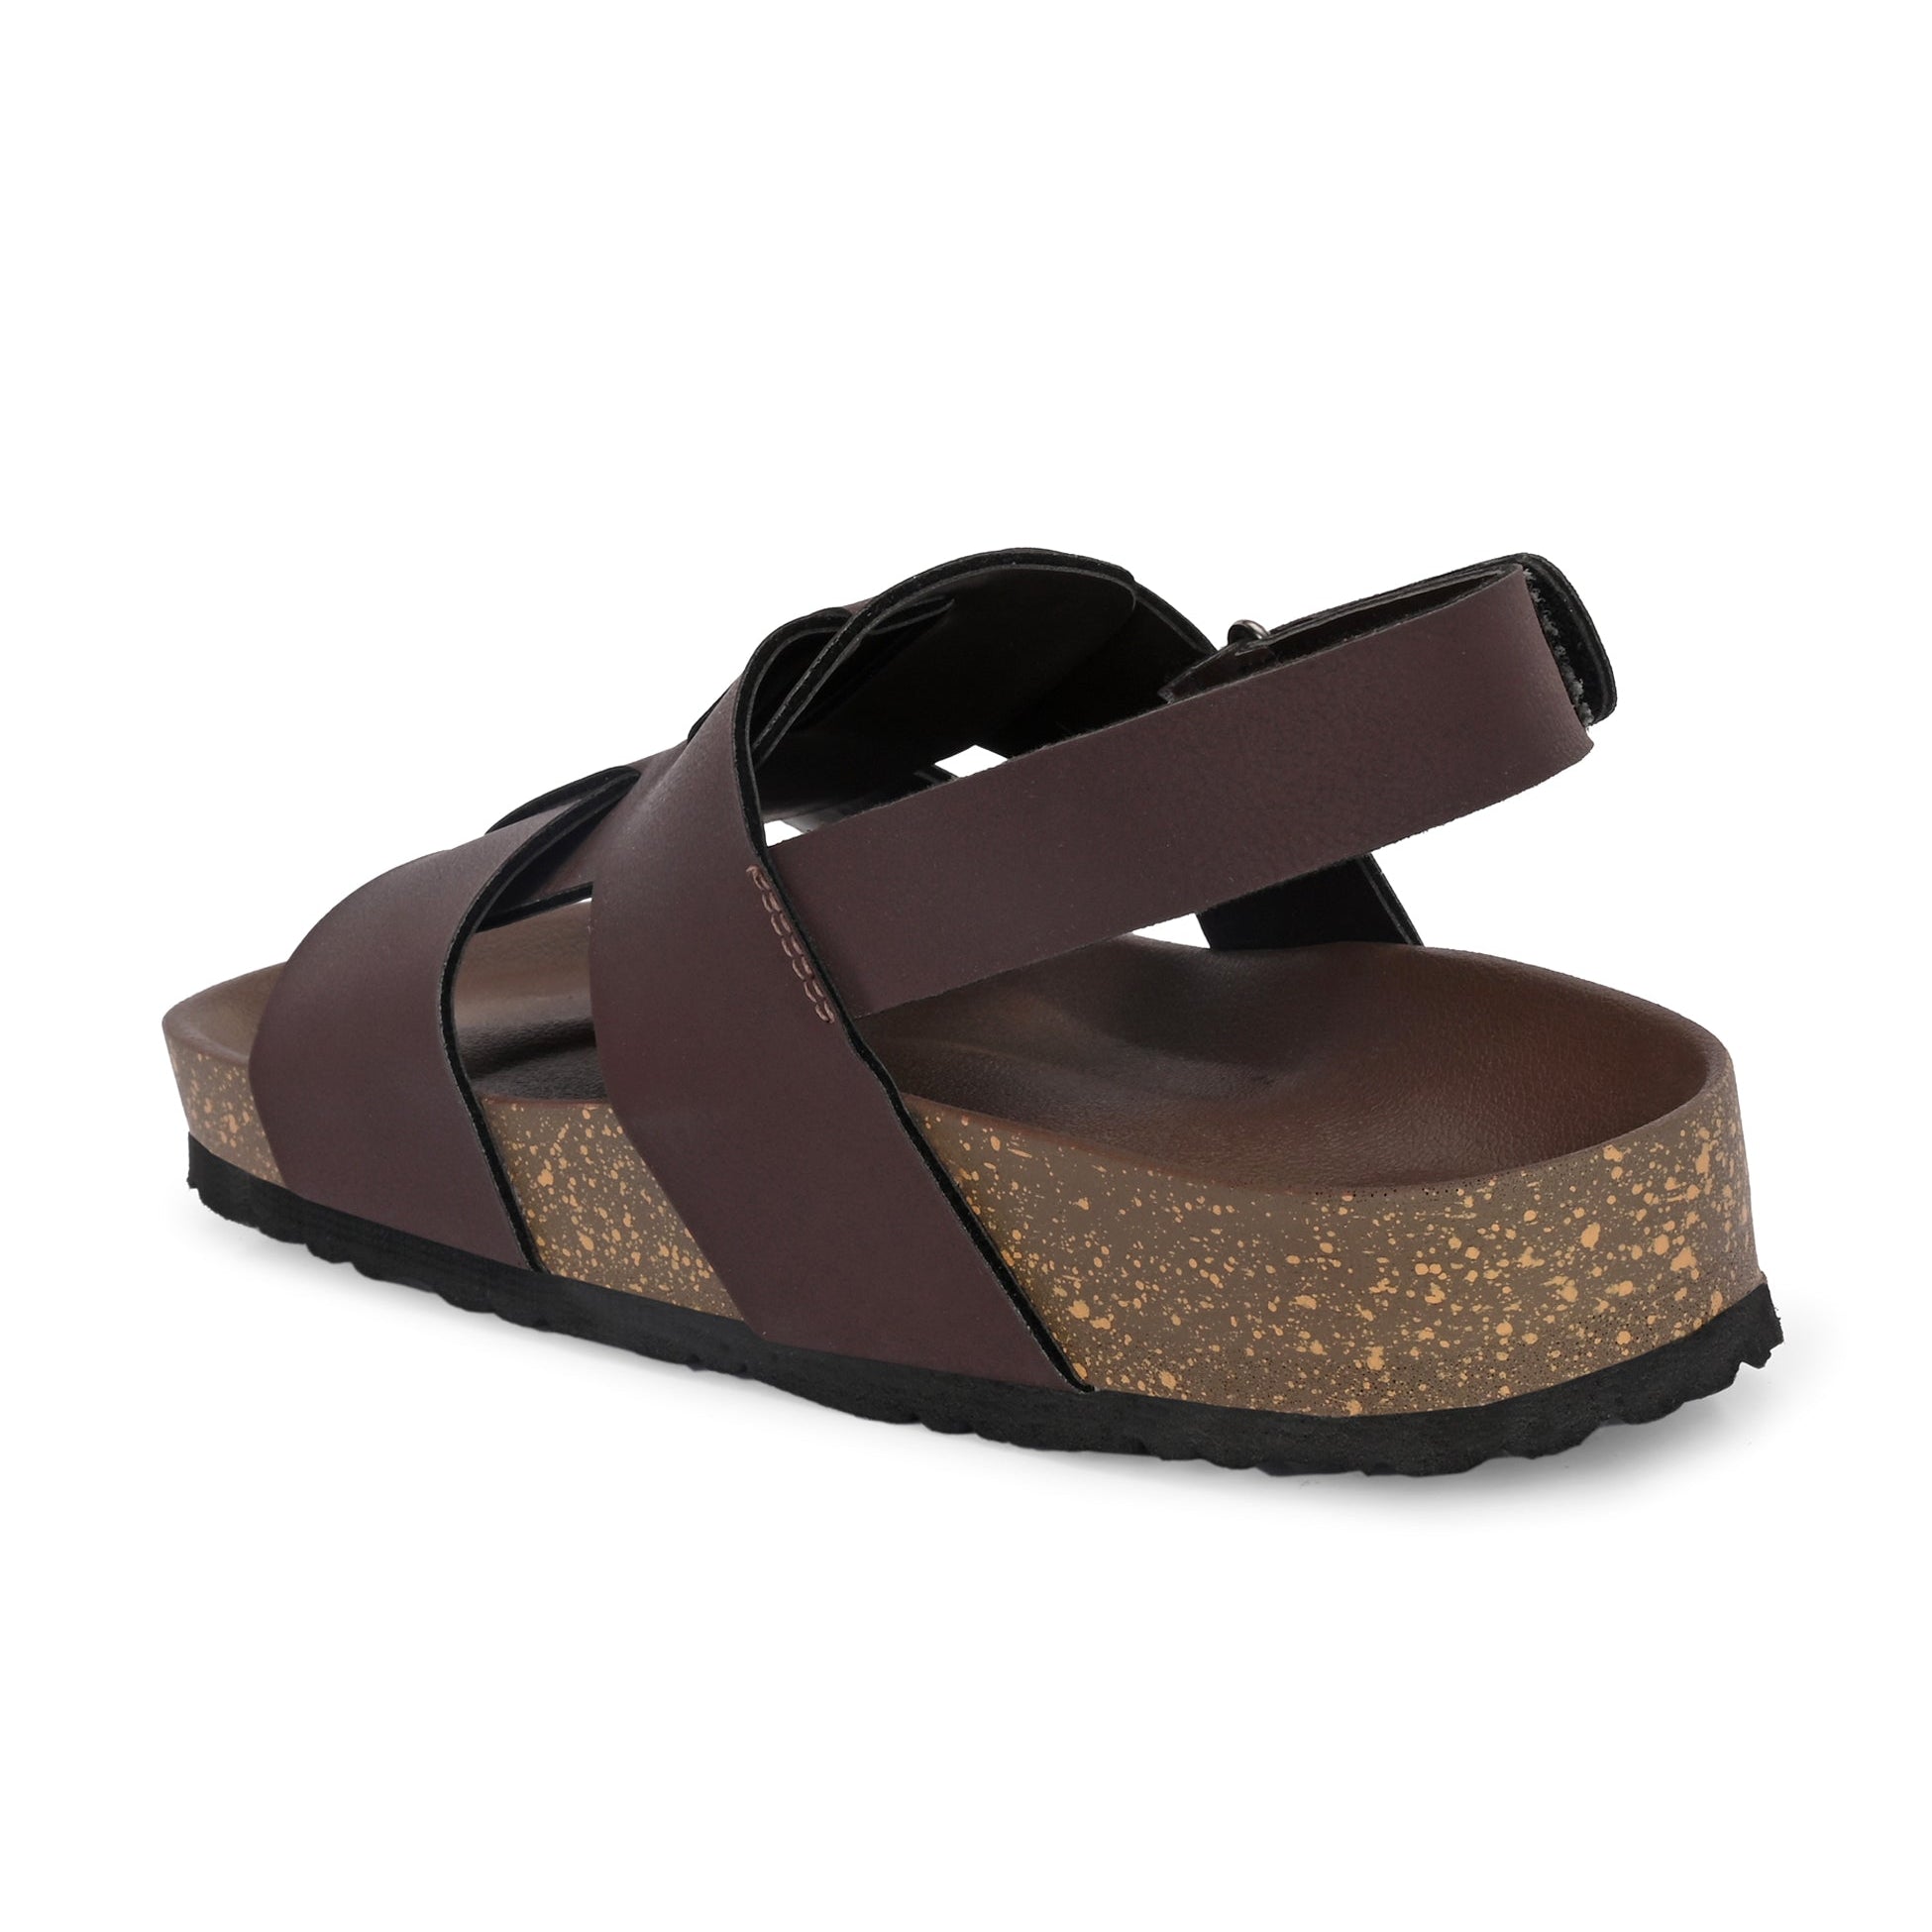 Brown Men's casual  flat heel buckle strap sandal with back strap closure